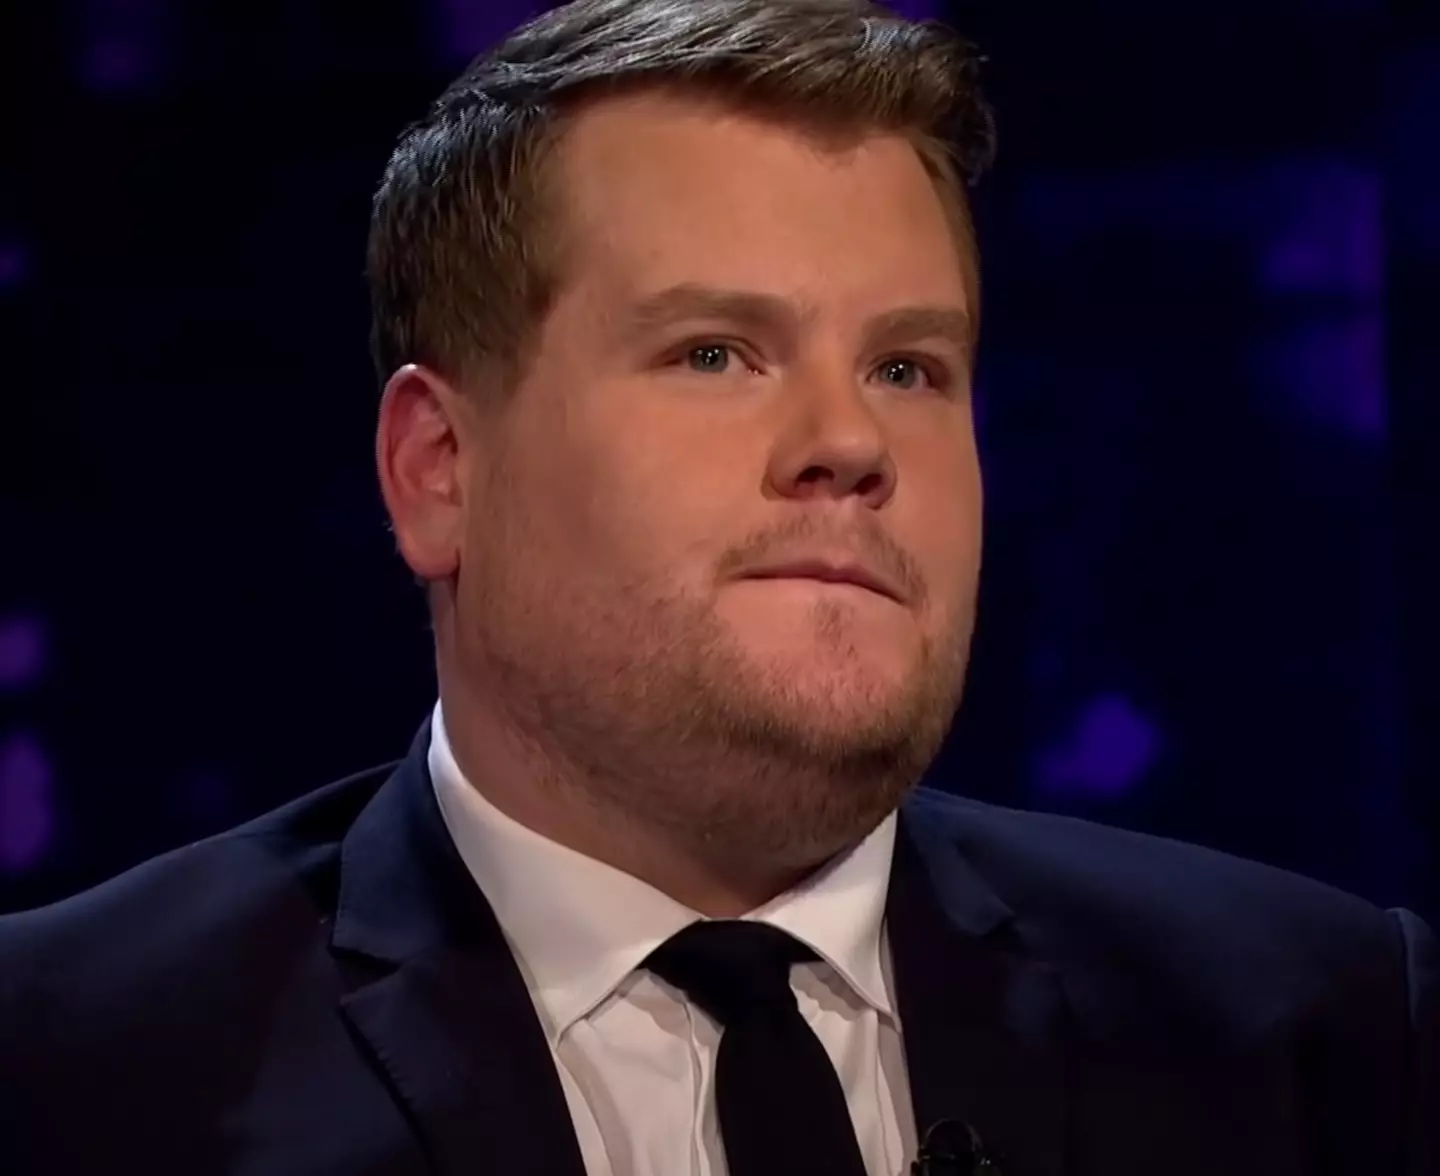 Corden seemed shattered when he learned that his mate said no to the interview.